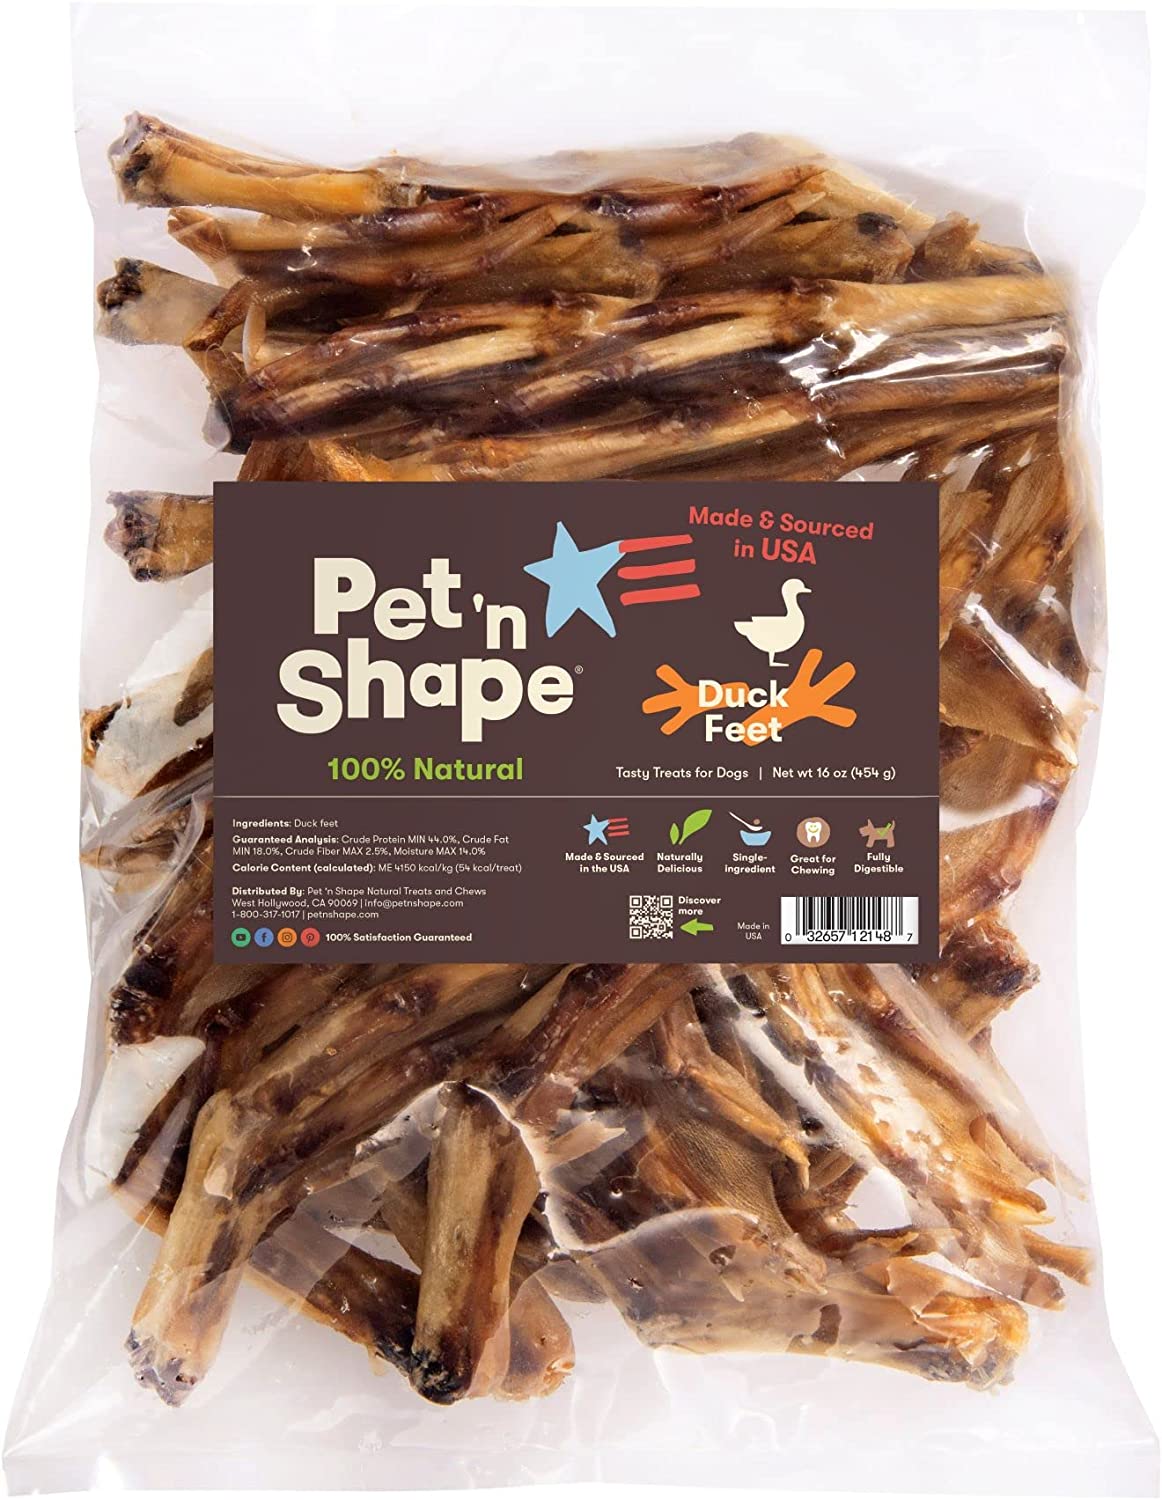 Pet 'n Shape - Made in USA - All Natural Duck Feet Dog Treats